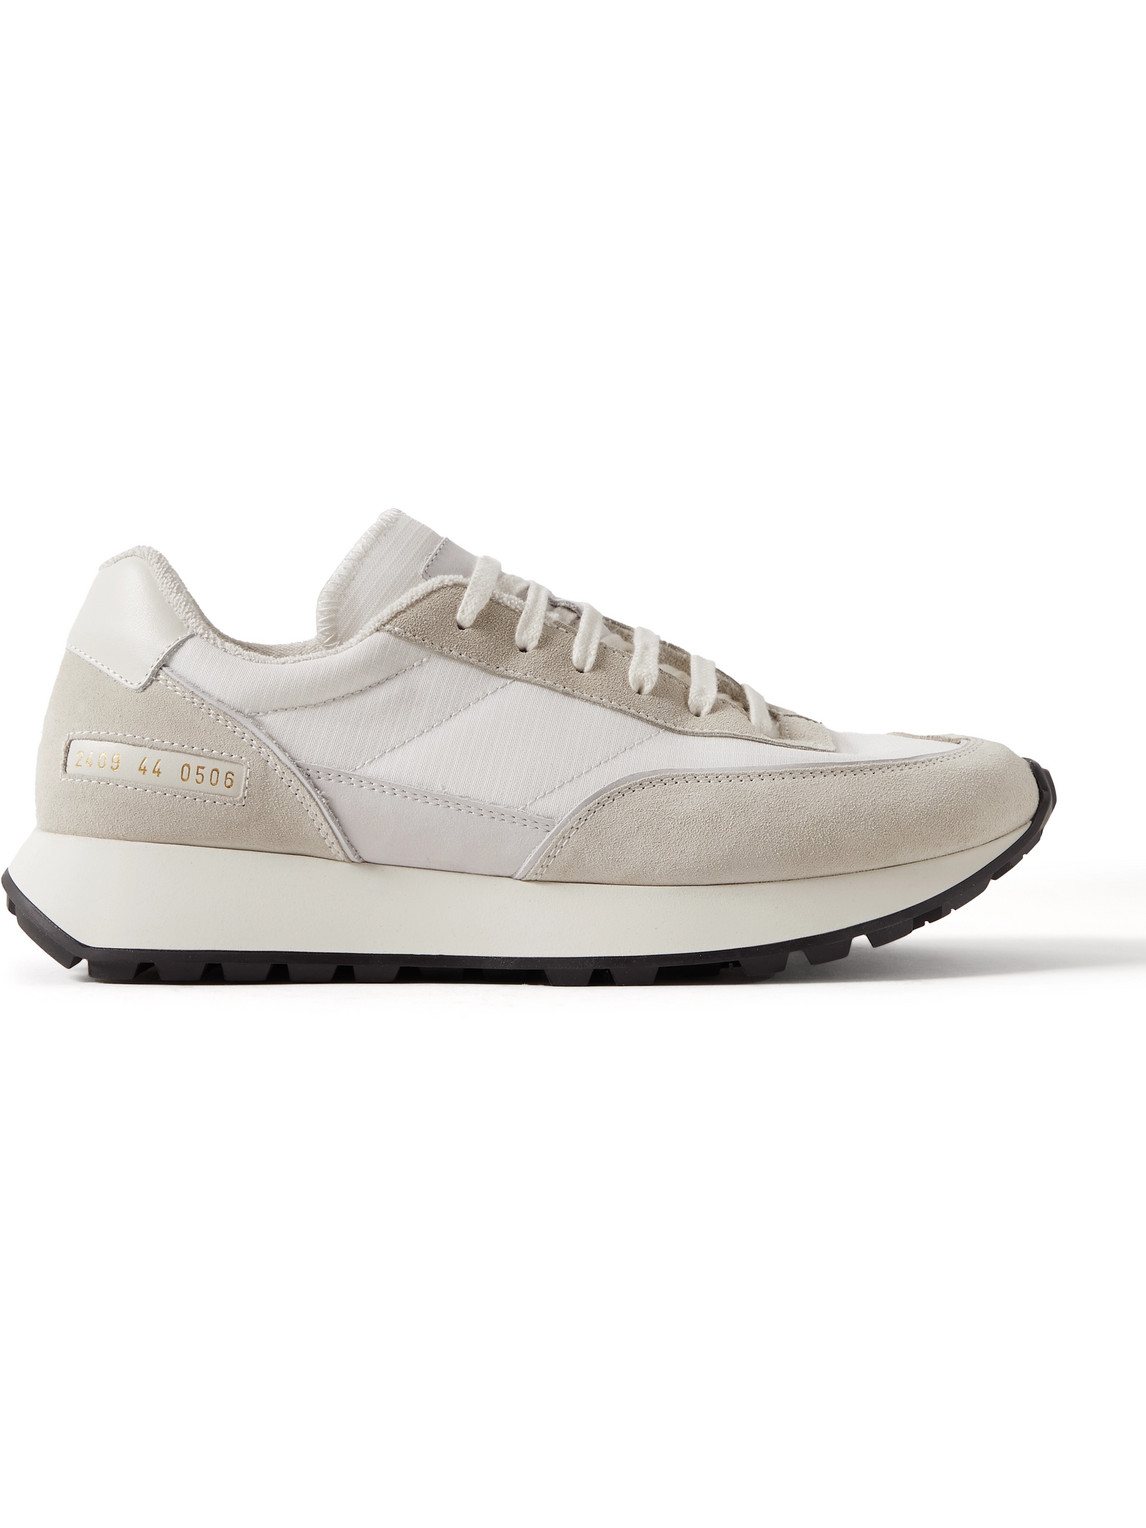 Common Projects - Track Classic Leather and Suede-Trimmed Ripstop Sneakers - Men - White - EU 42 von Common Projects